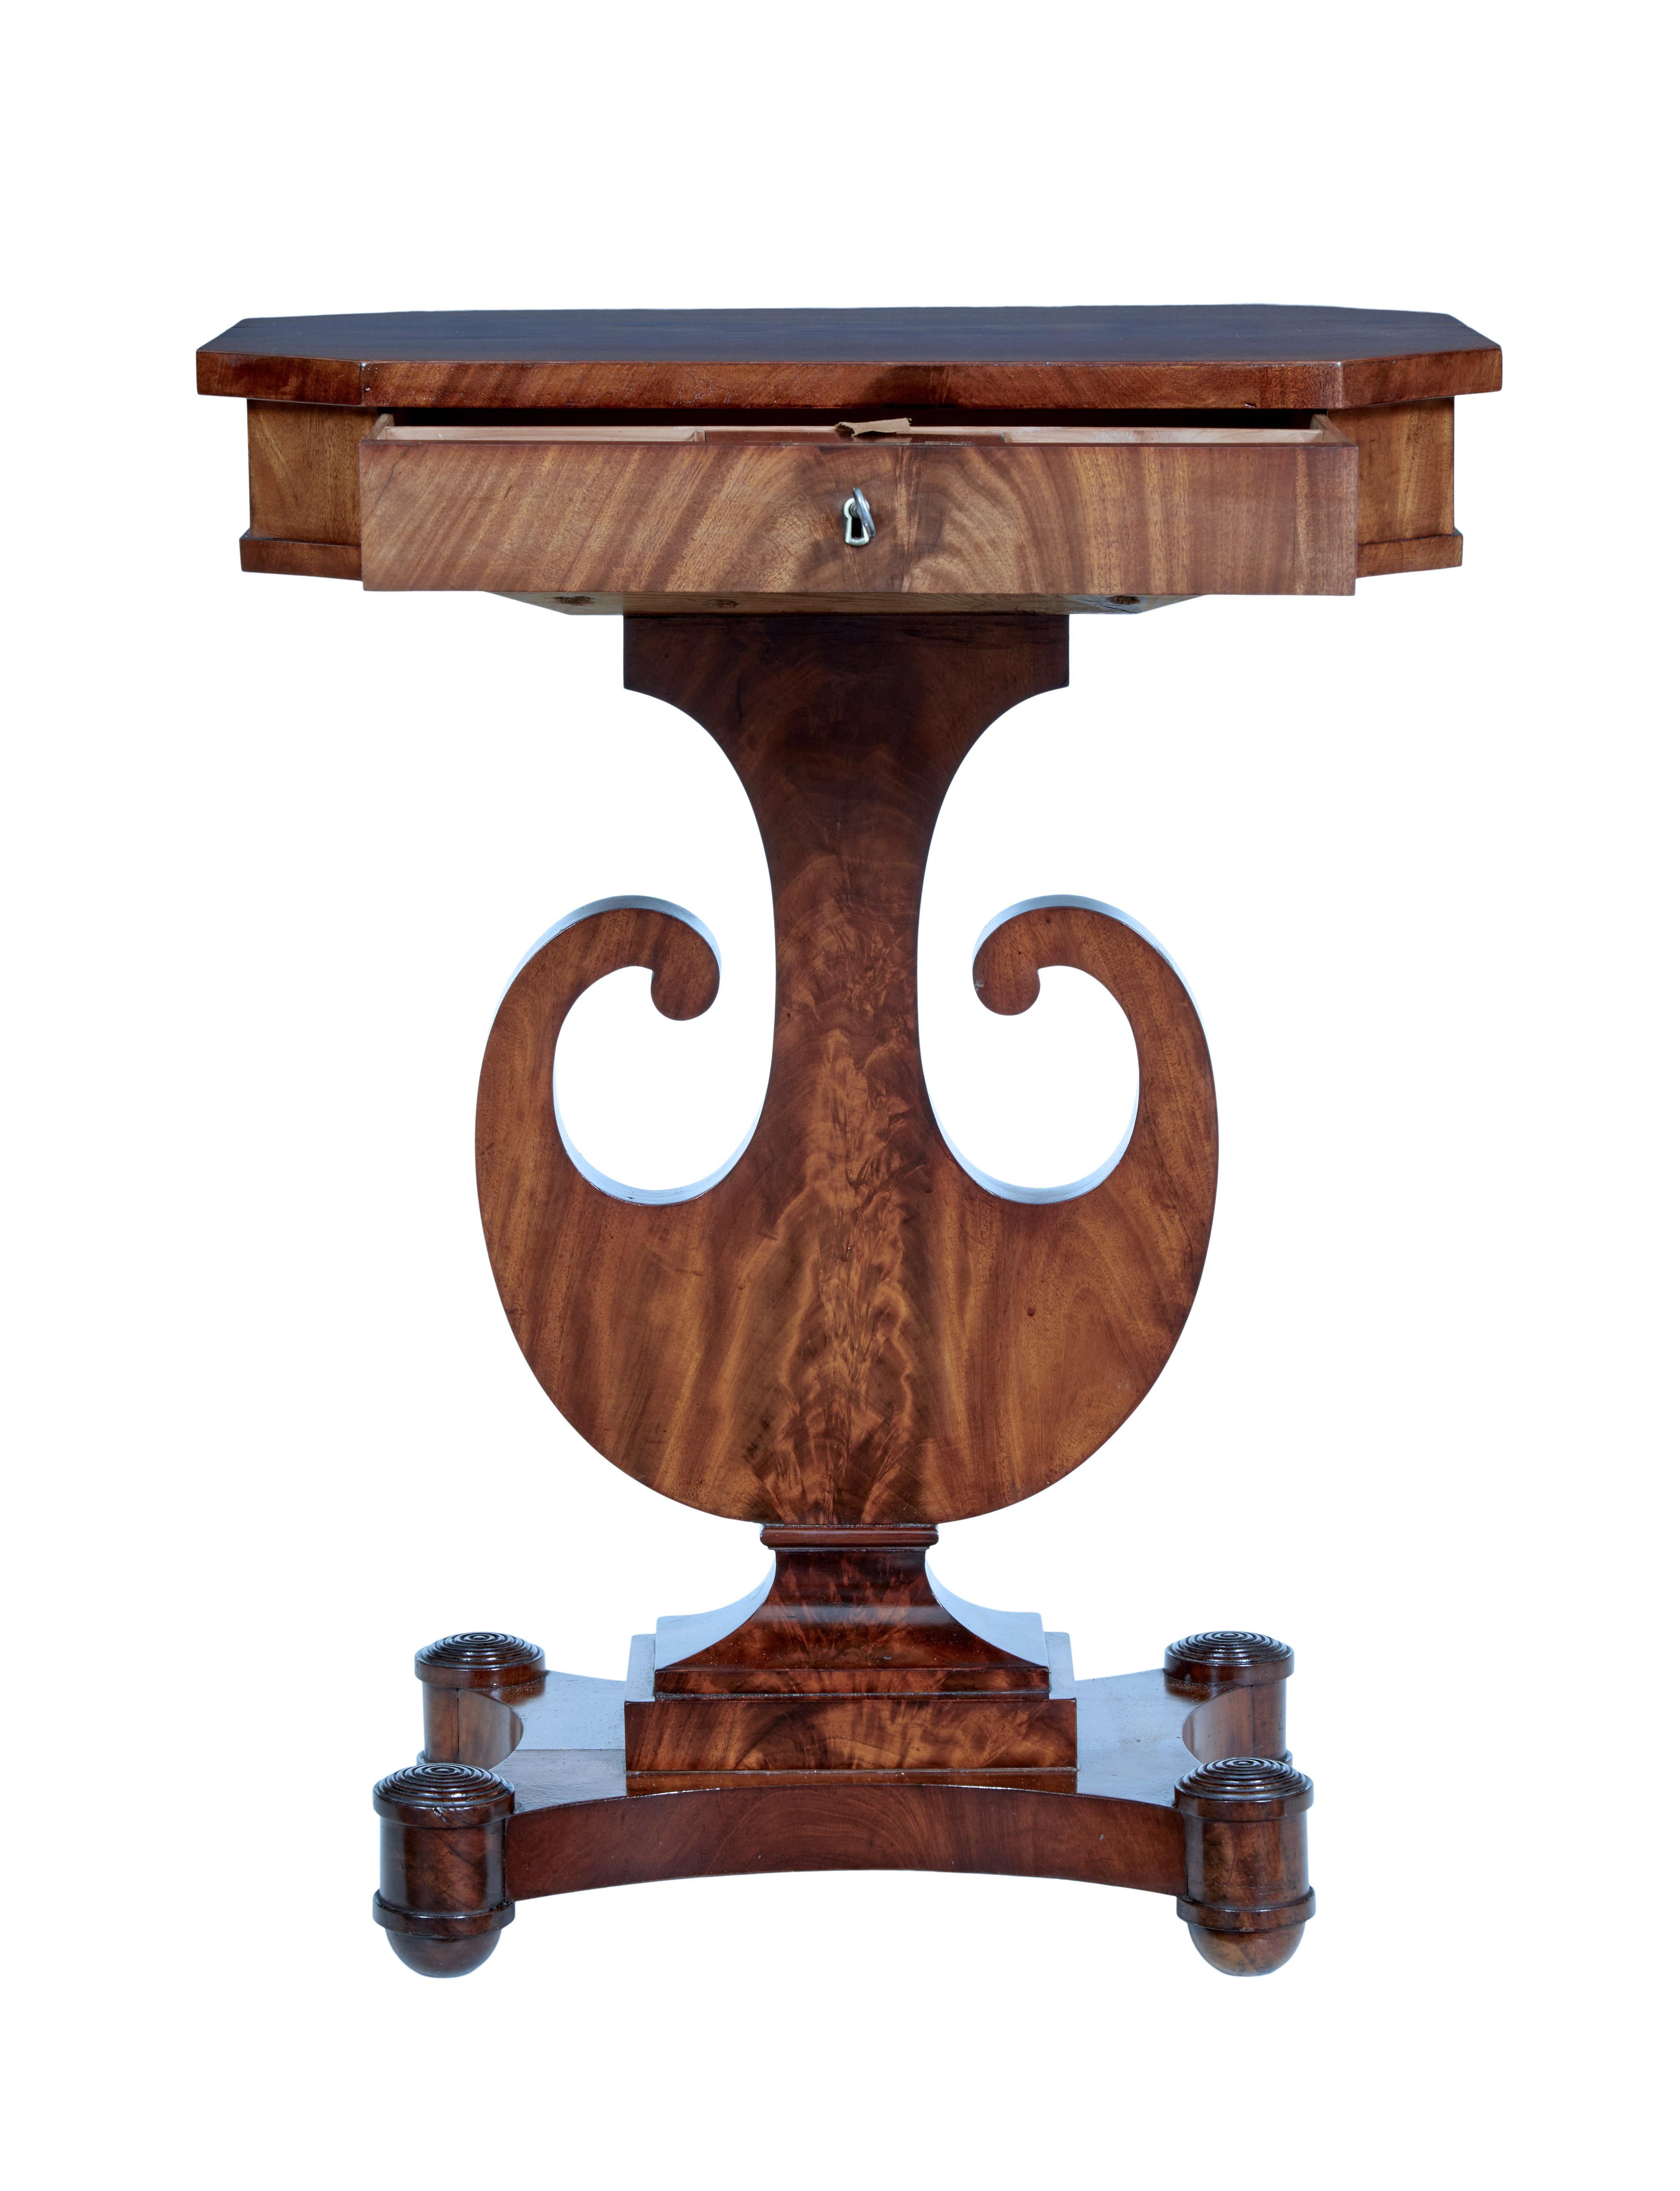 19th century flame mahogany lyre form sewing table circa 1860.

Fine quality 19th century mahogany work table. Circa 1860. Shaped top with fitted drawer below and hinged pin cushion. Lyre shaped base, standing on quadriform base with roundel